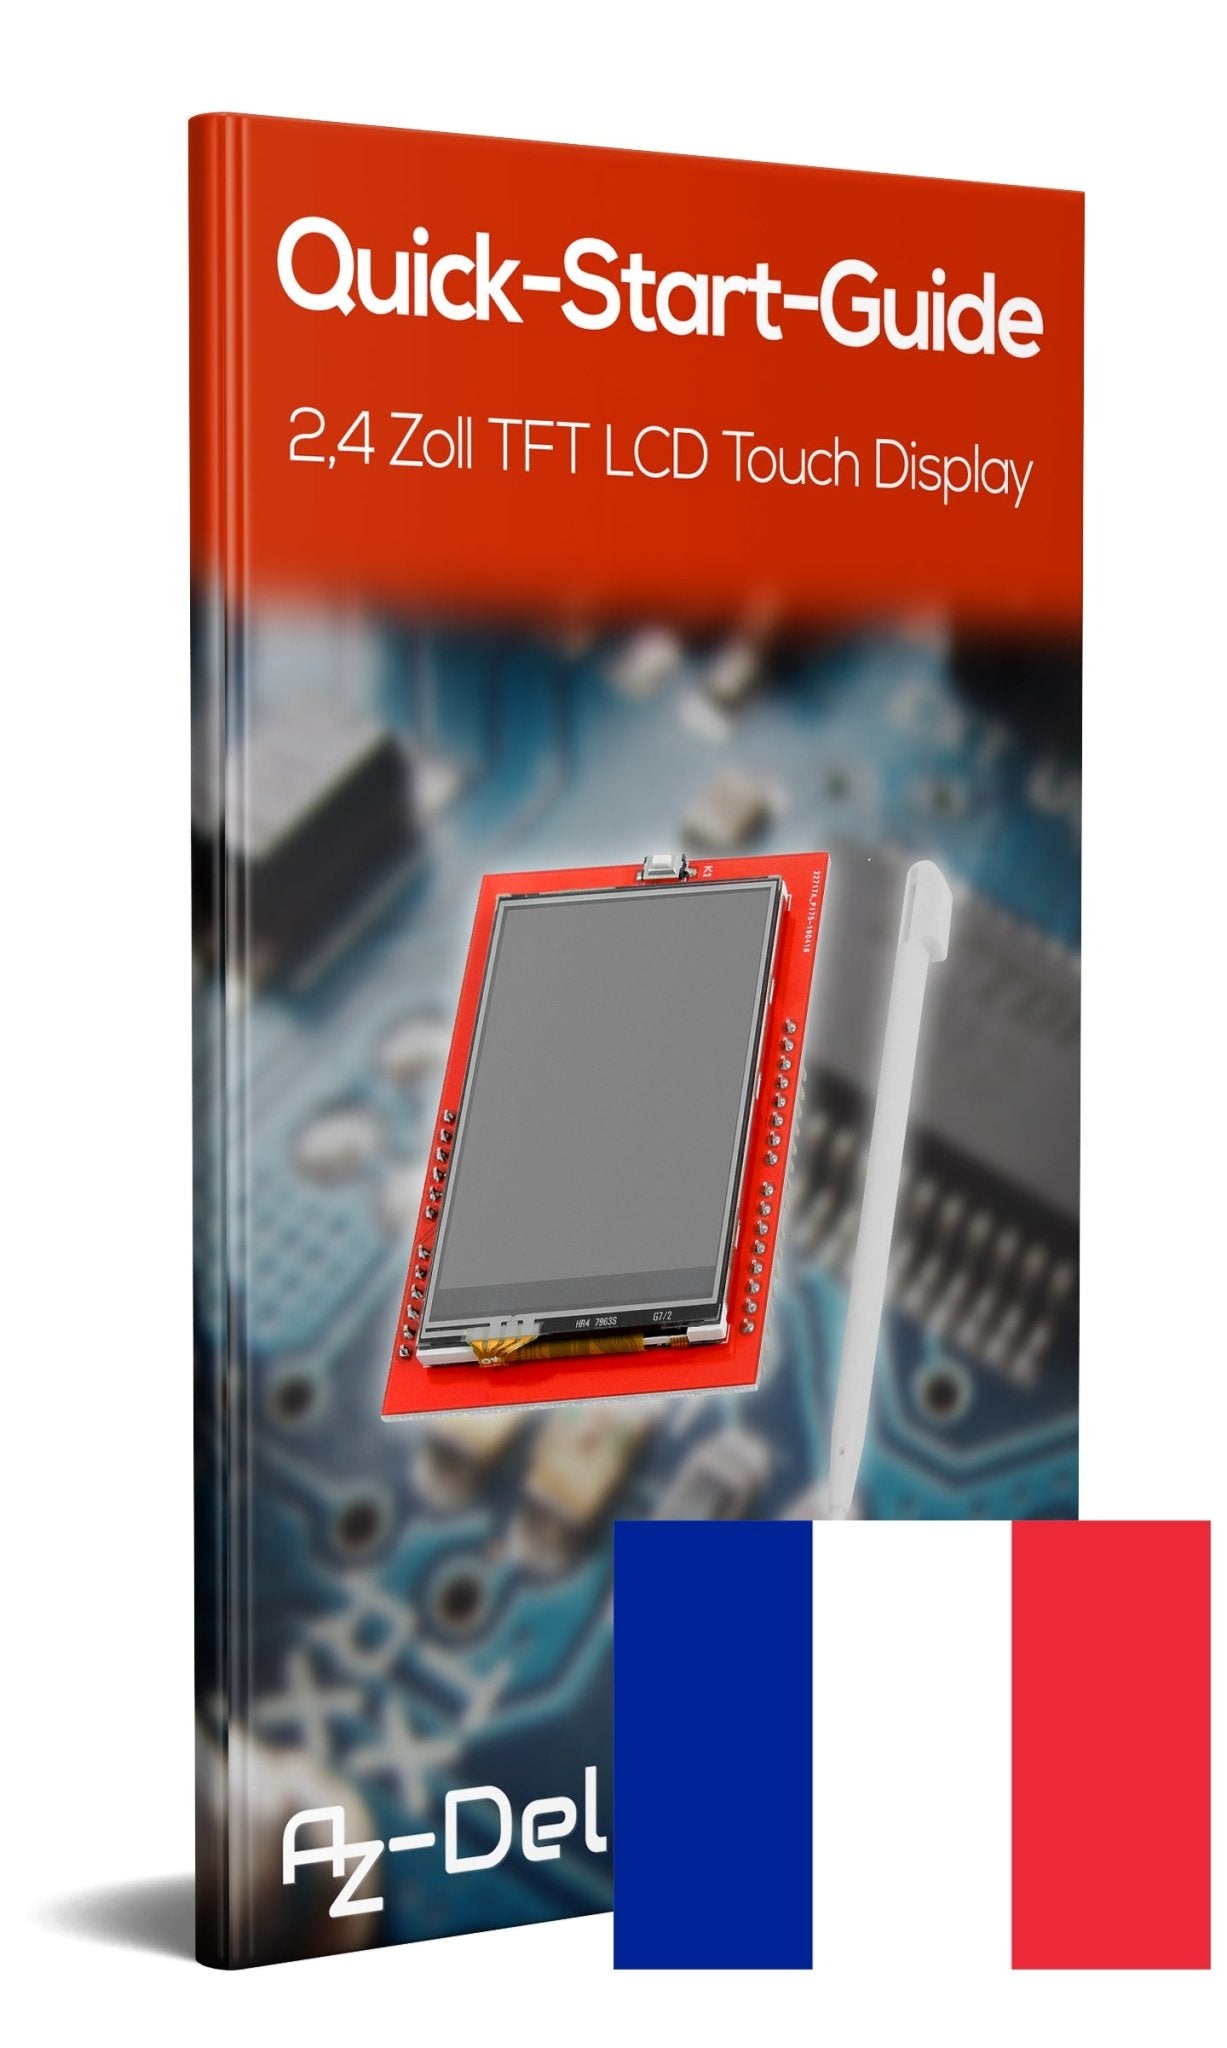 2,4 Zoll TFT LCD Touch Display